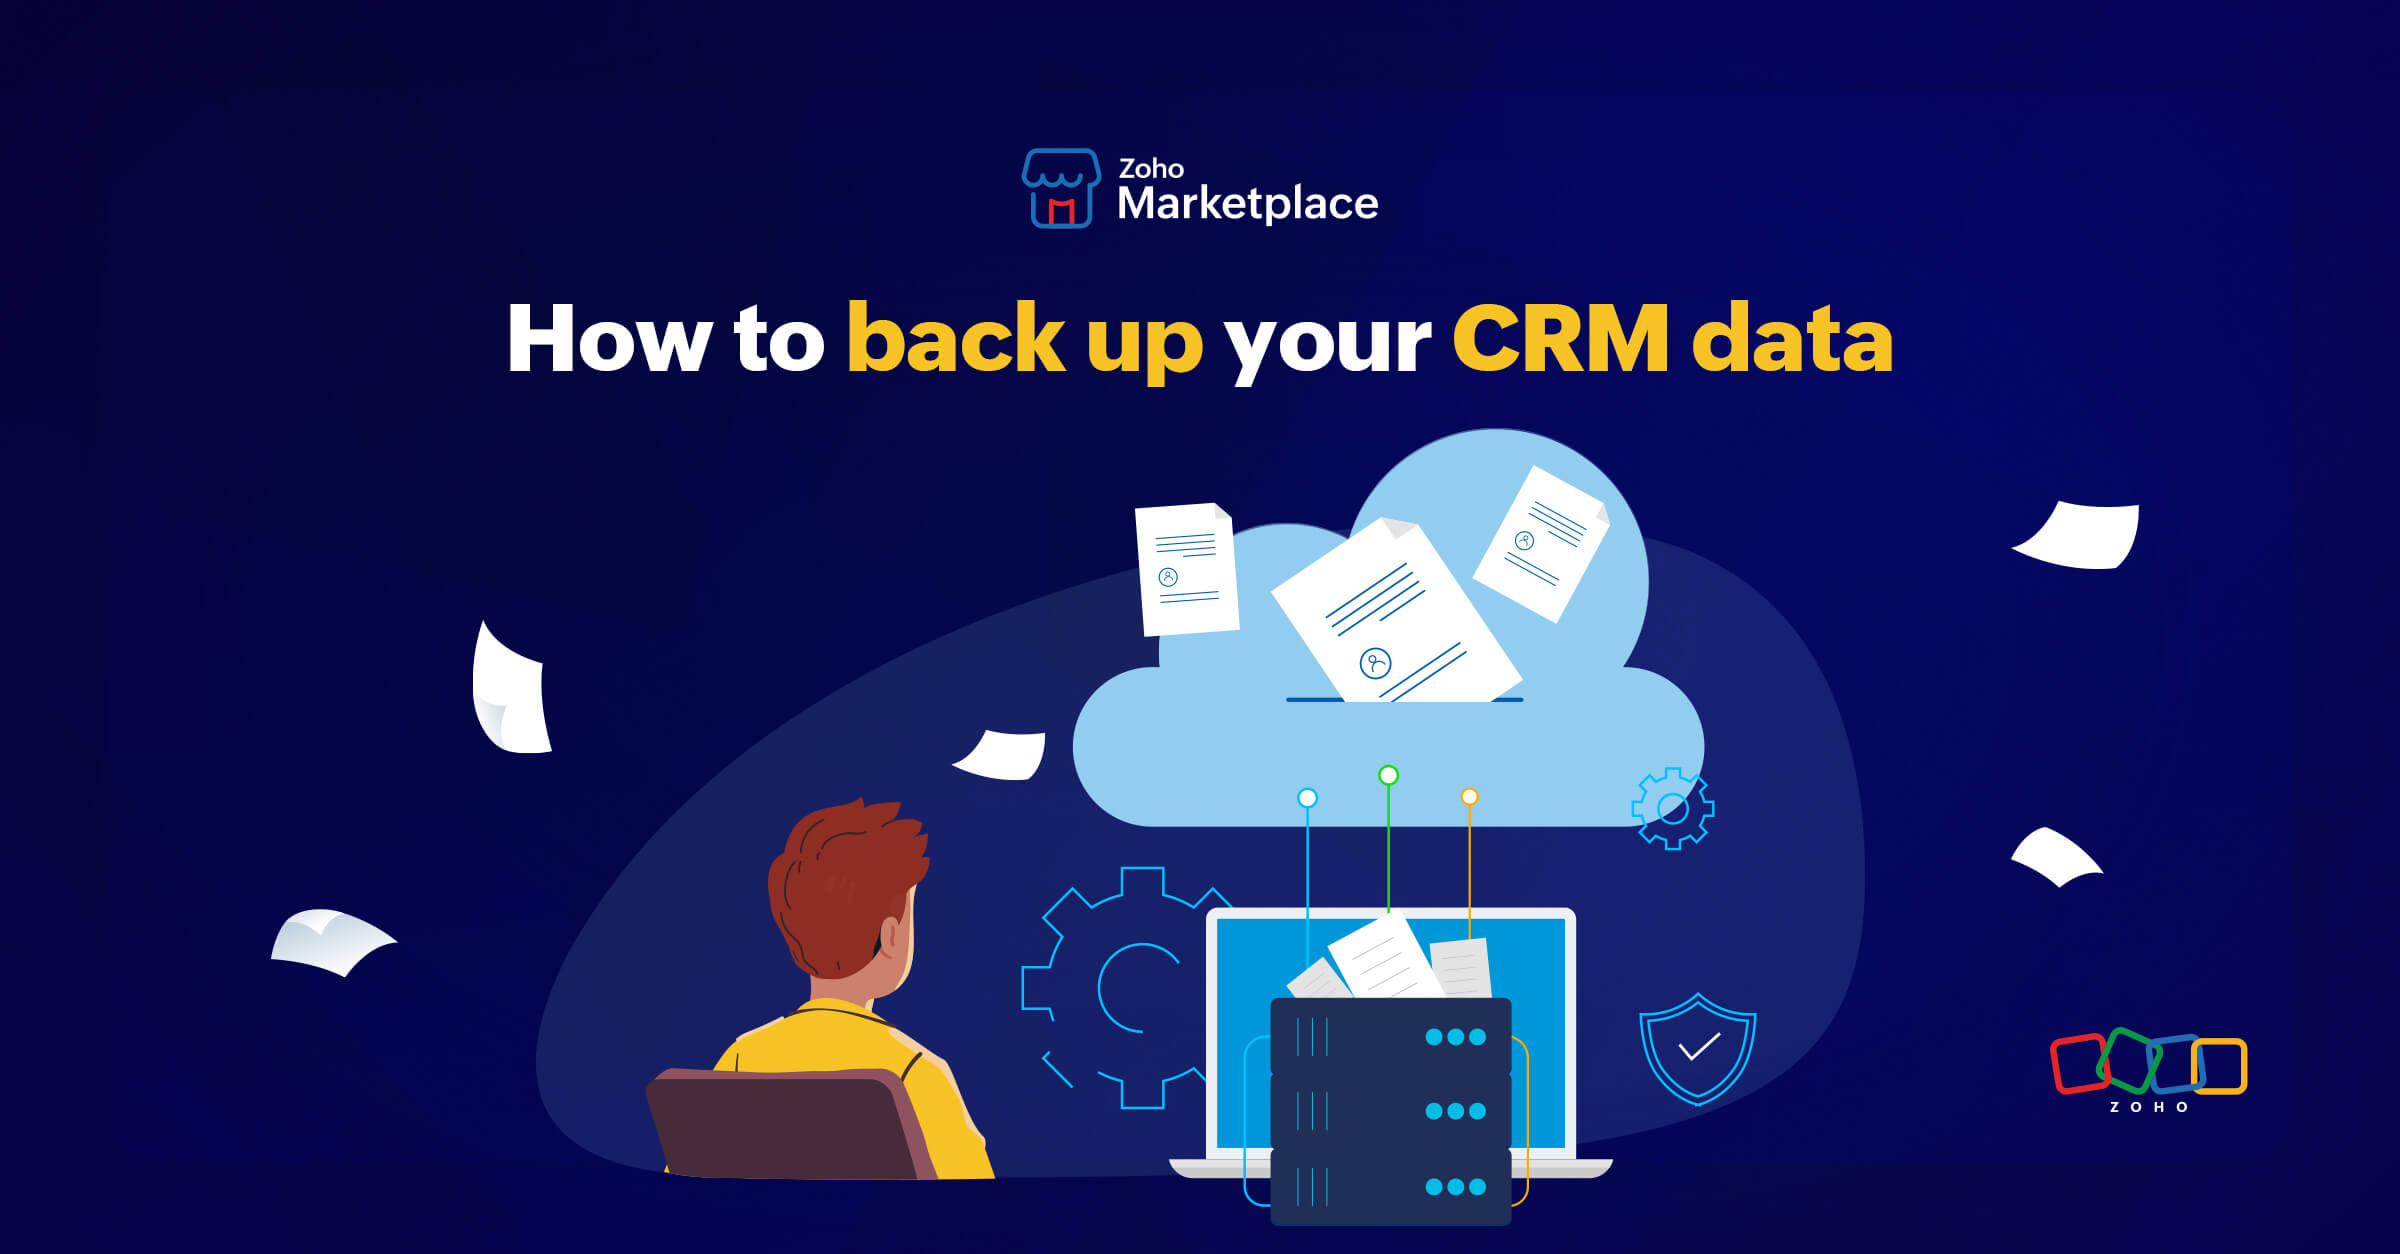 How to back up your CRM data